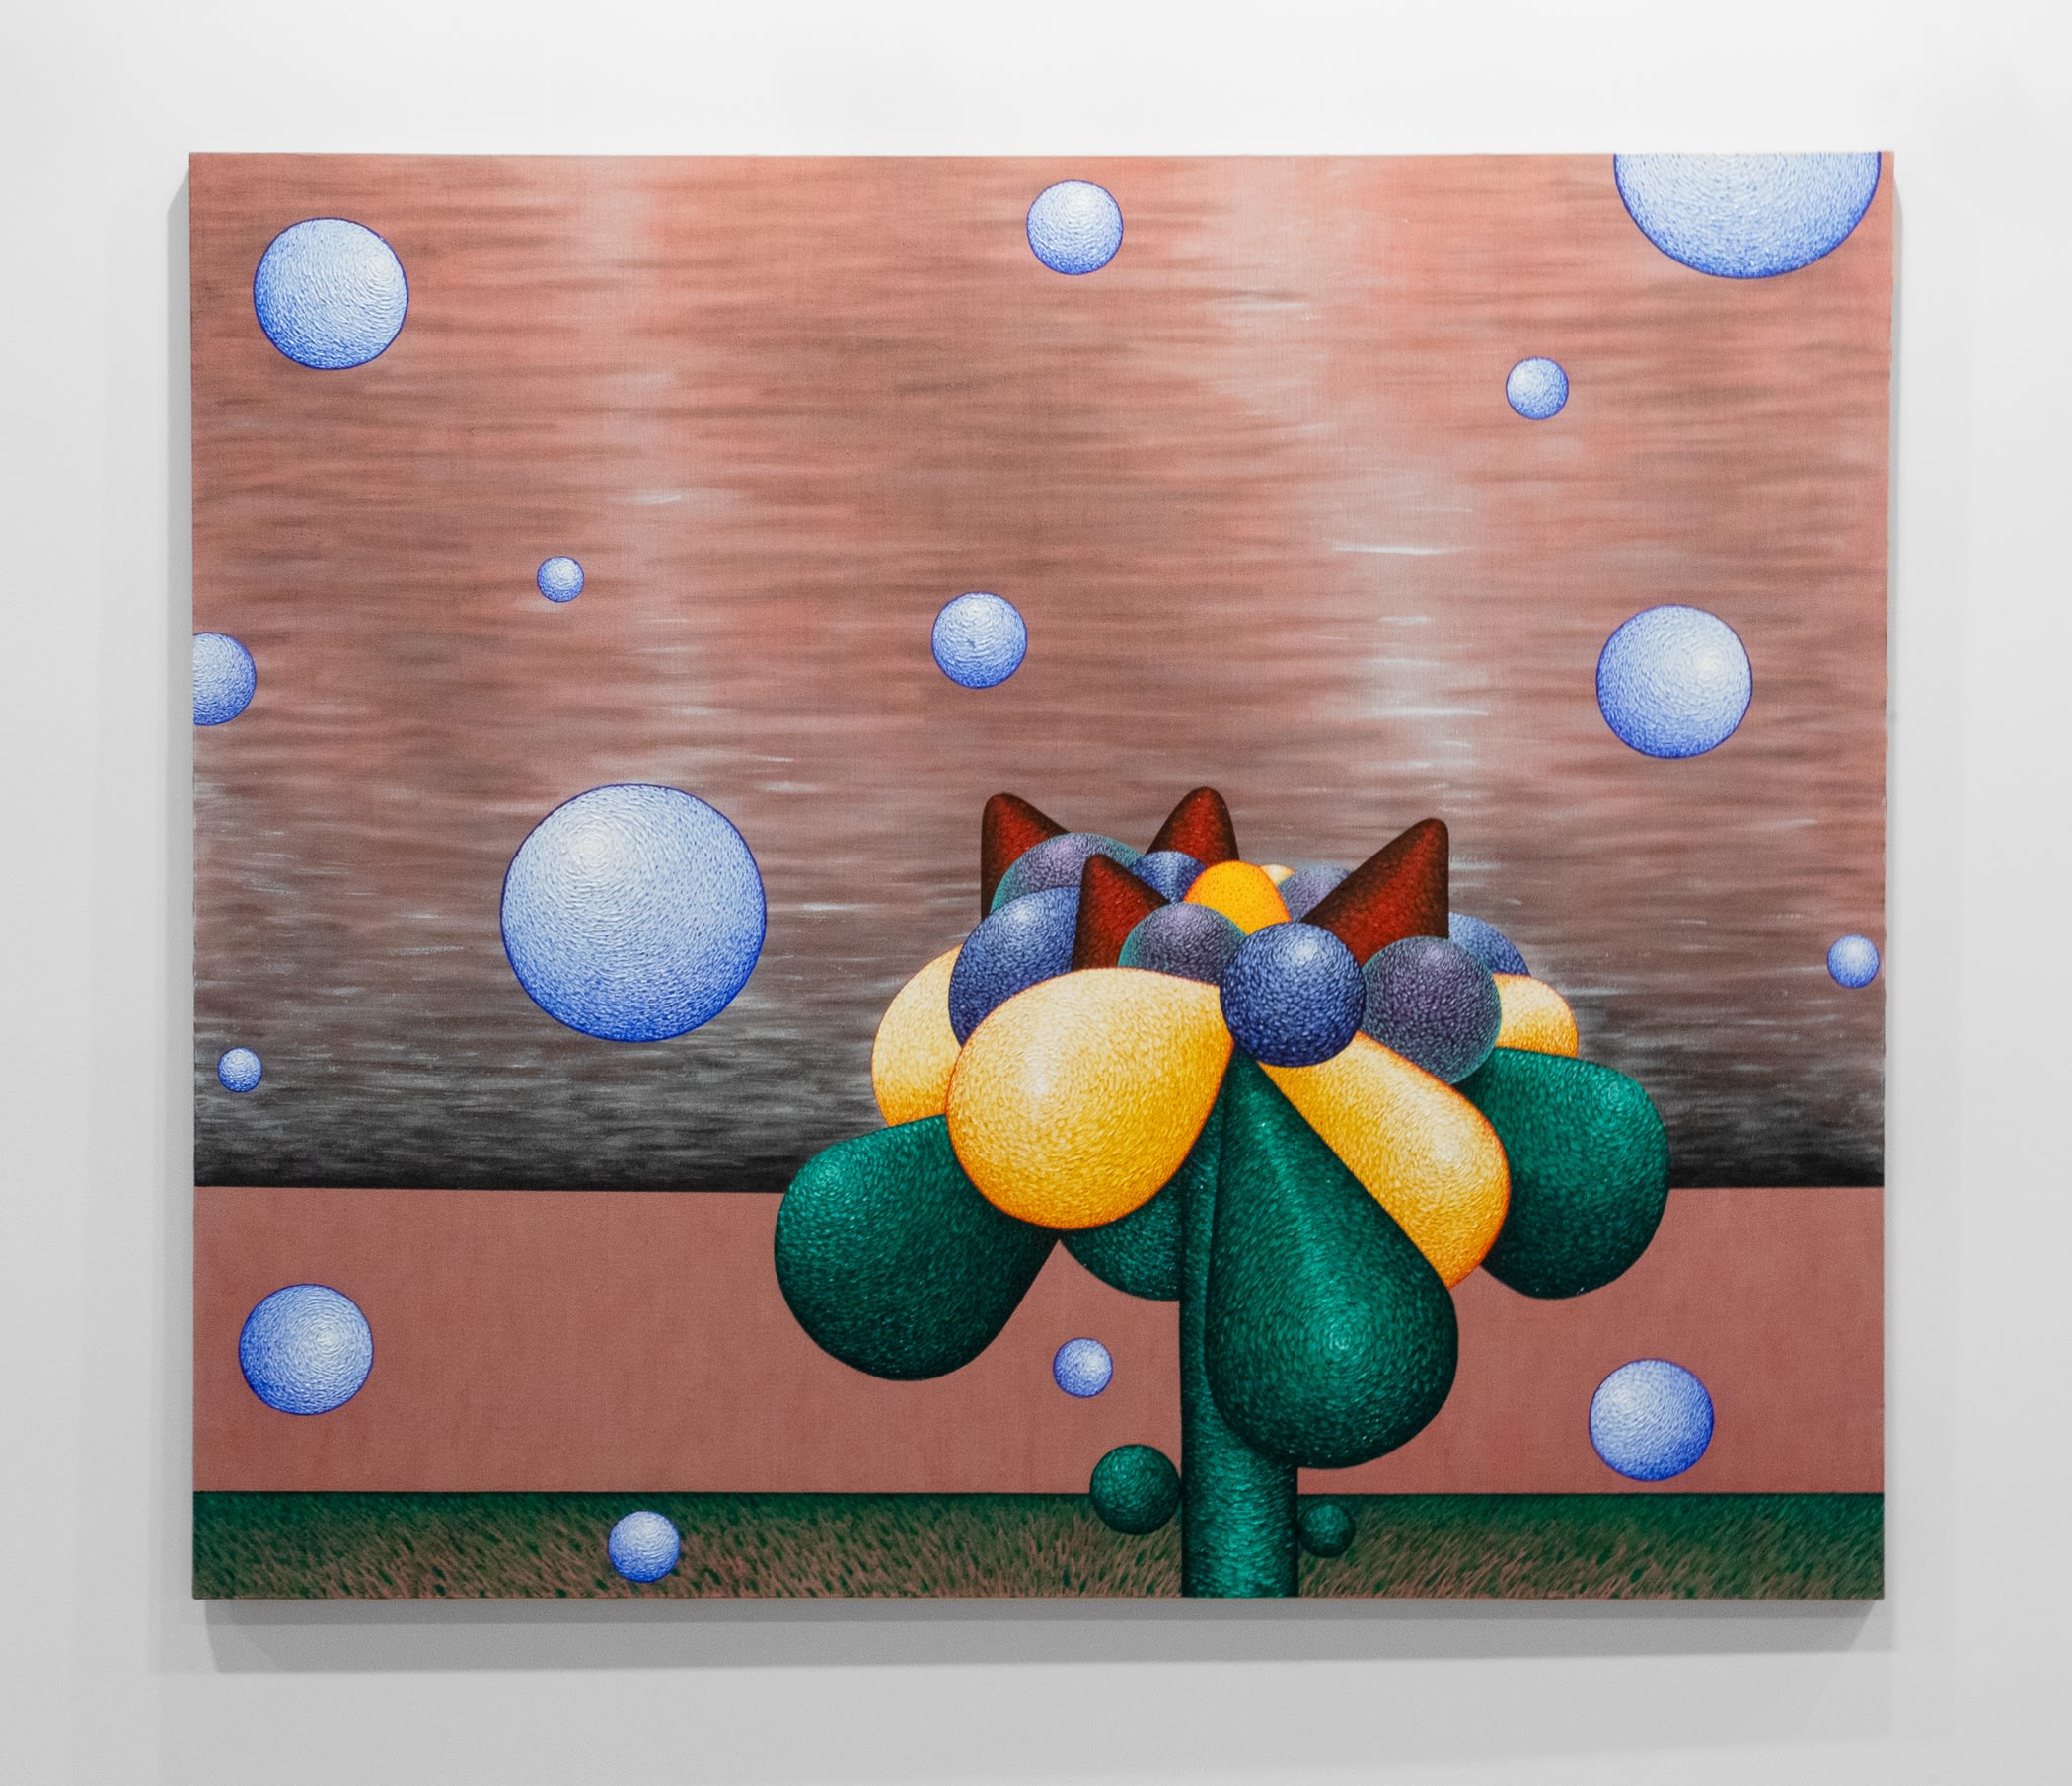 Christian Butterfield, Apology flower #8 (across the bay), 2021, acrylic on canvas, 84 x 72 in